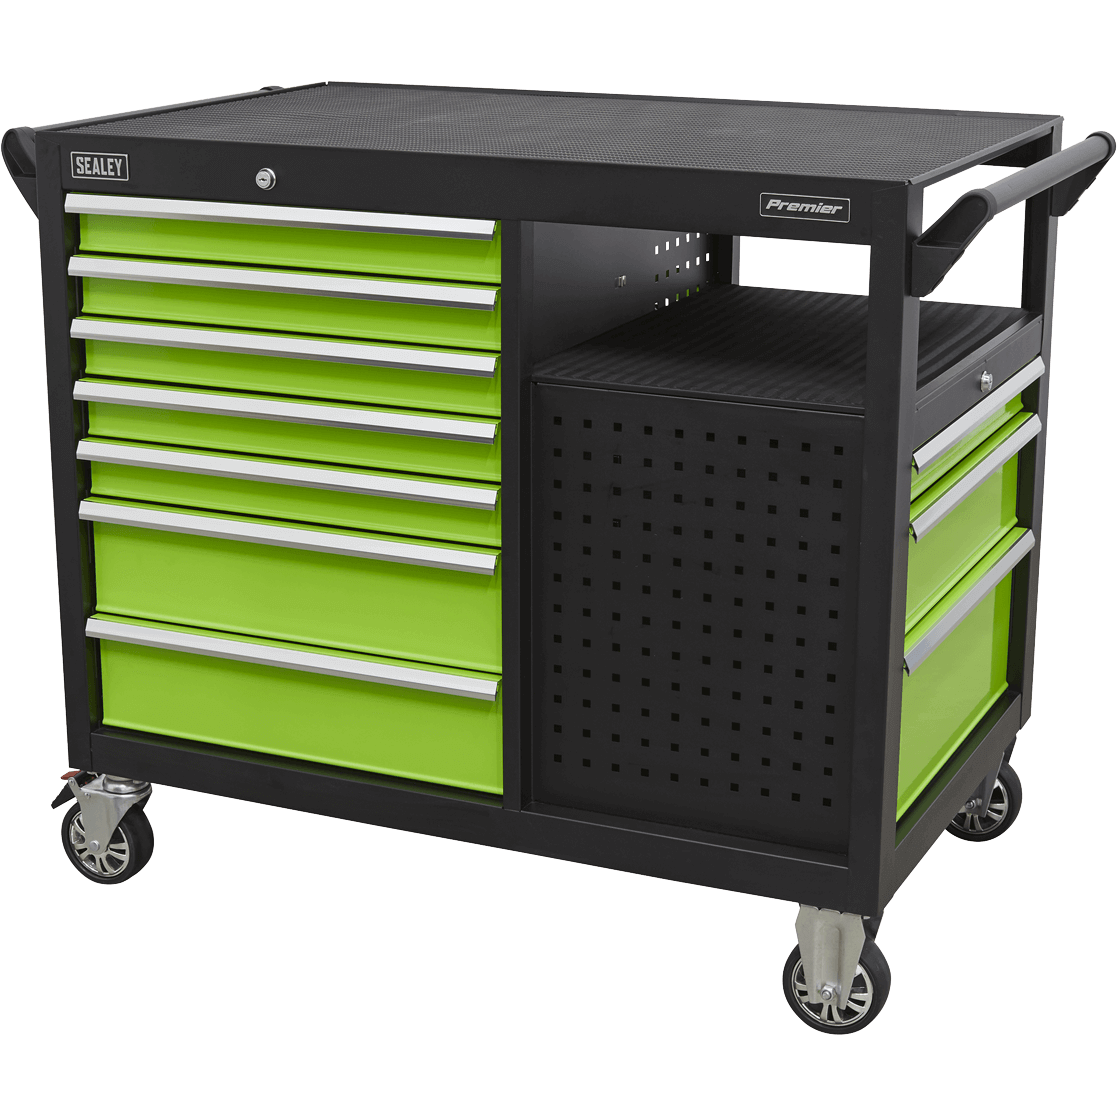 Sealey 10 Drawer Tool Roller Cabinet and Workstation Black / Green